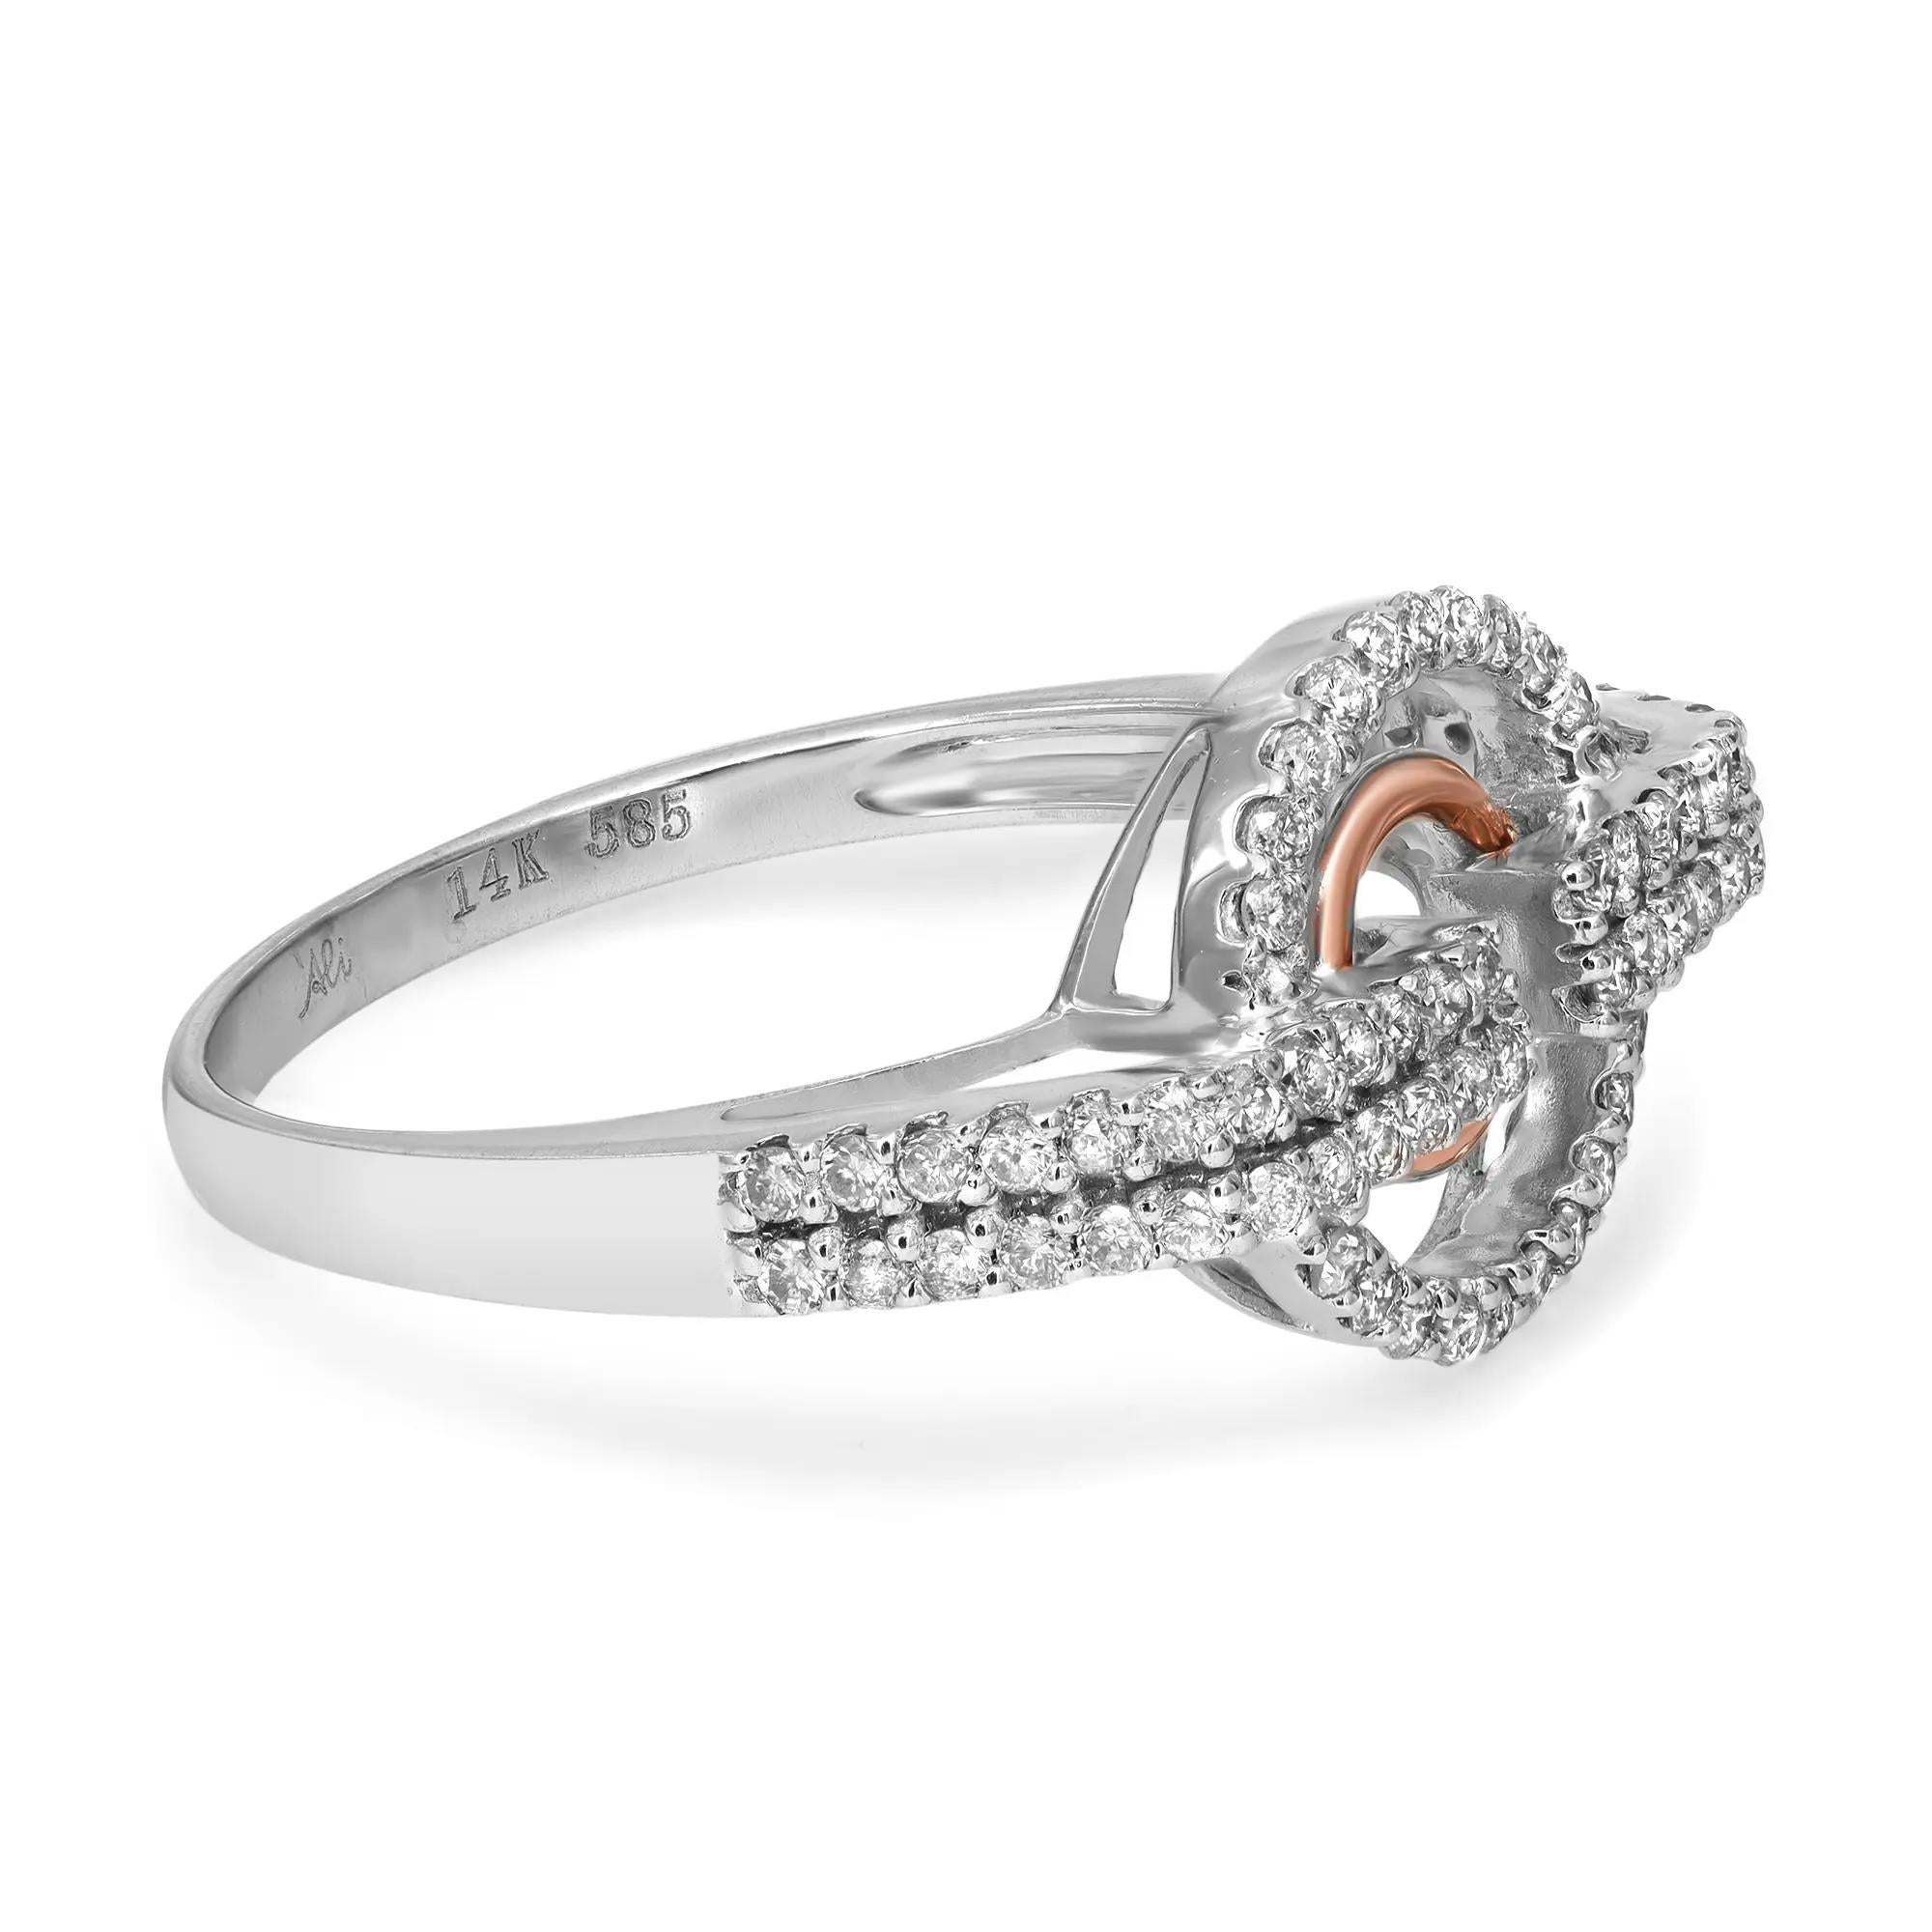 Chic and Trendy, ladies diamond ring. This ring features prong set round brilliant cut diamonds set on a circular pattern. Crafted in high polished 14k white gold with a 14K rose gold ring in the center. Total diamond weight: 0.43 carat with color I